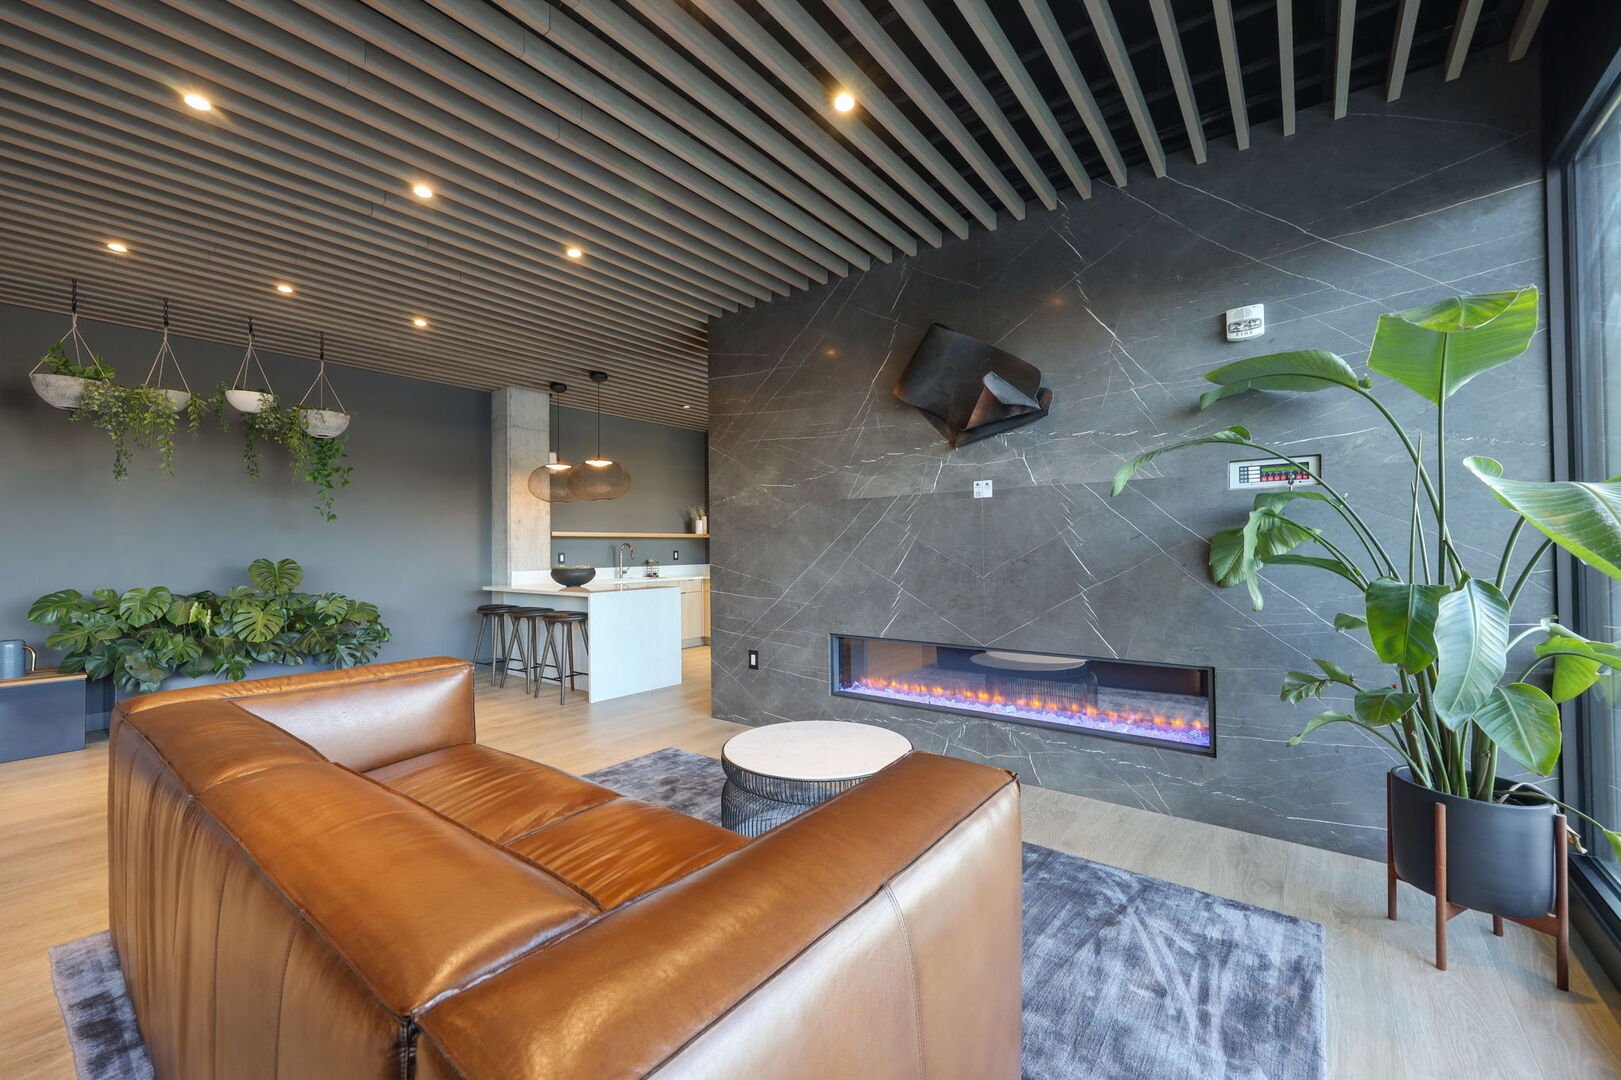 Communal Area: Modern lobby lounge featuring a kitchenette, electric fireplace and multiple hangout areas.